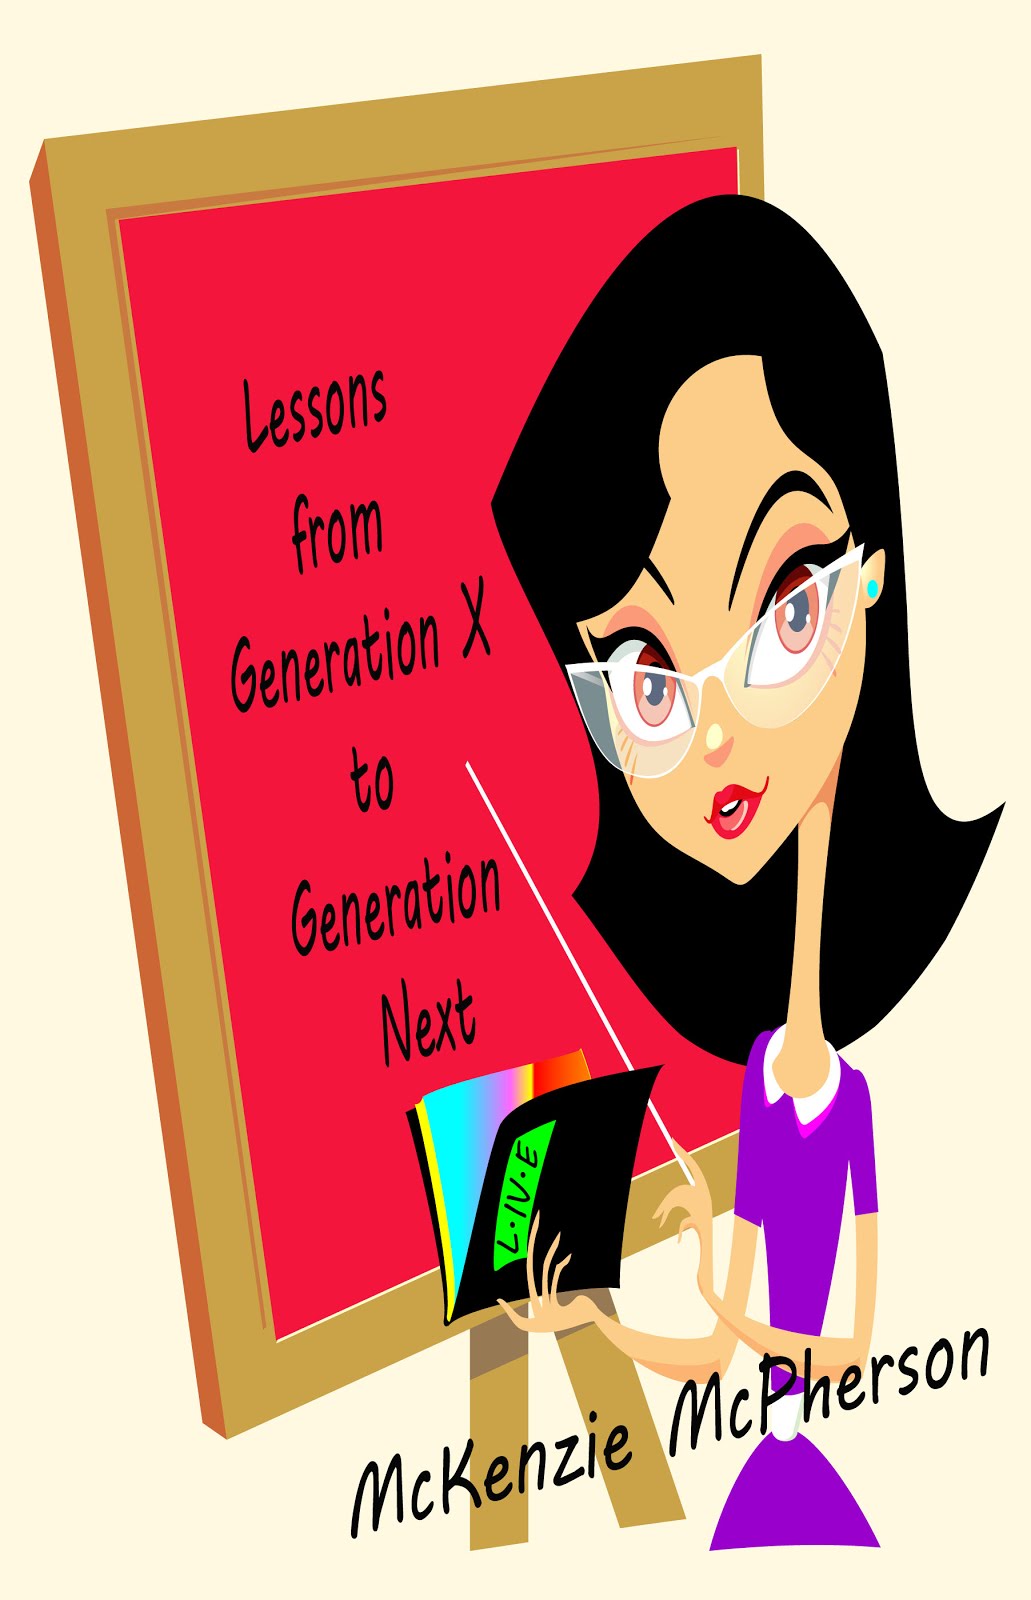 Lessons from Generation X to Generation Next McKenzie McPherson